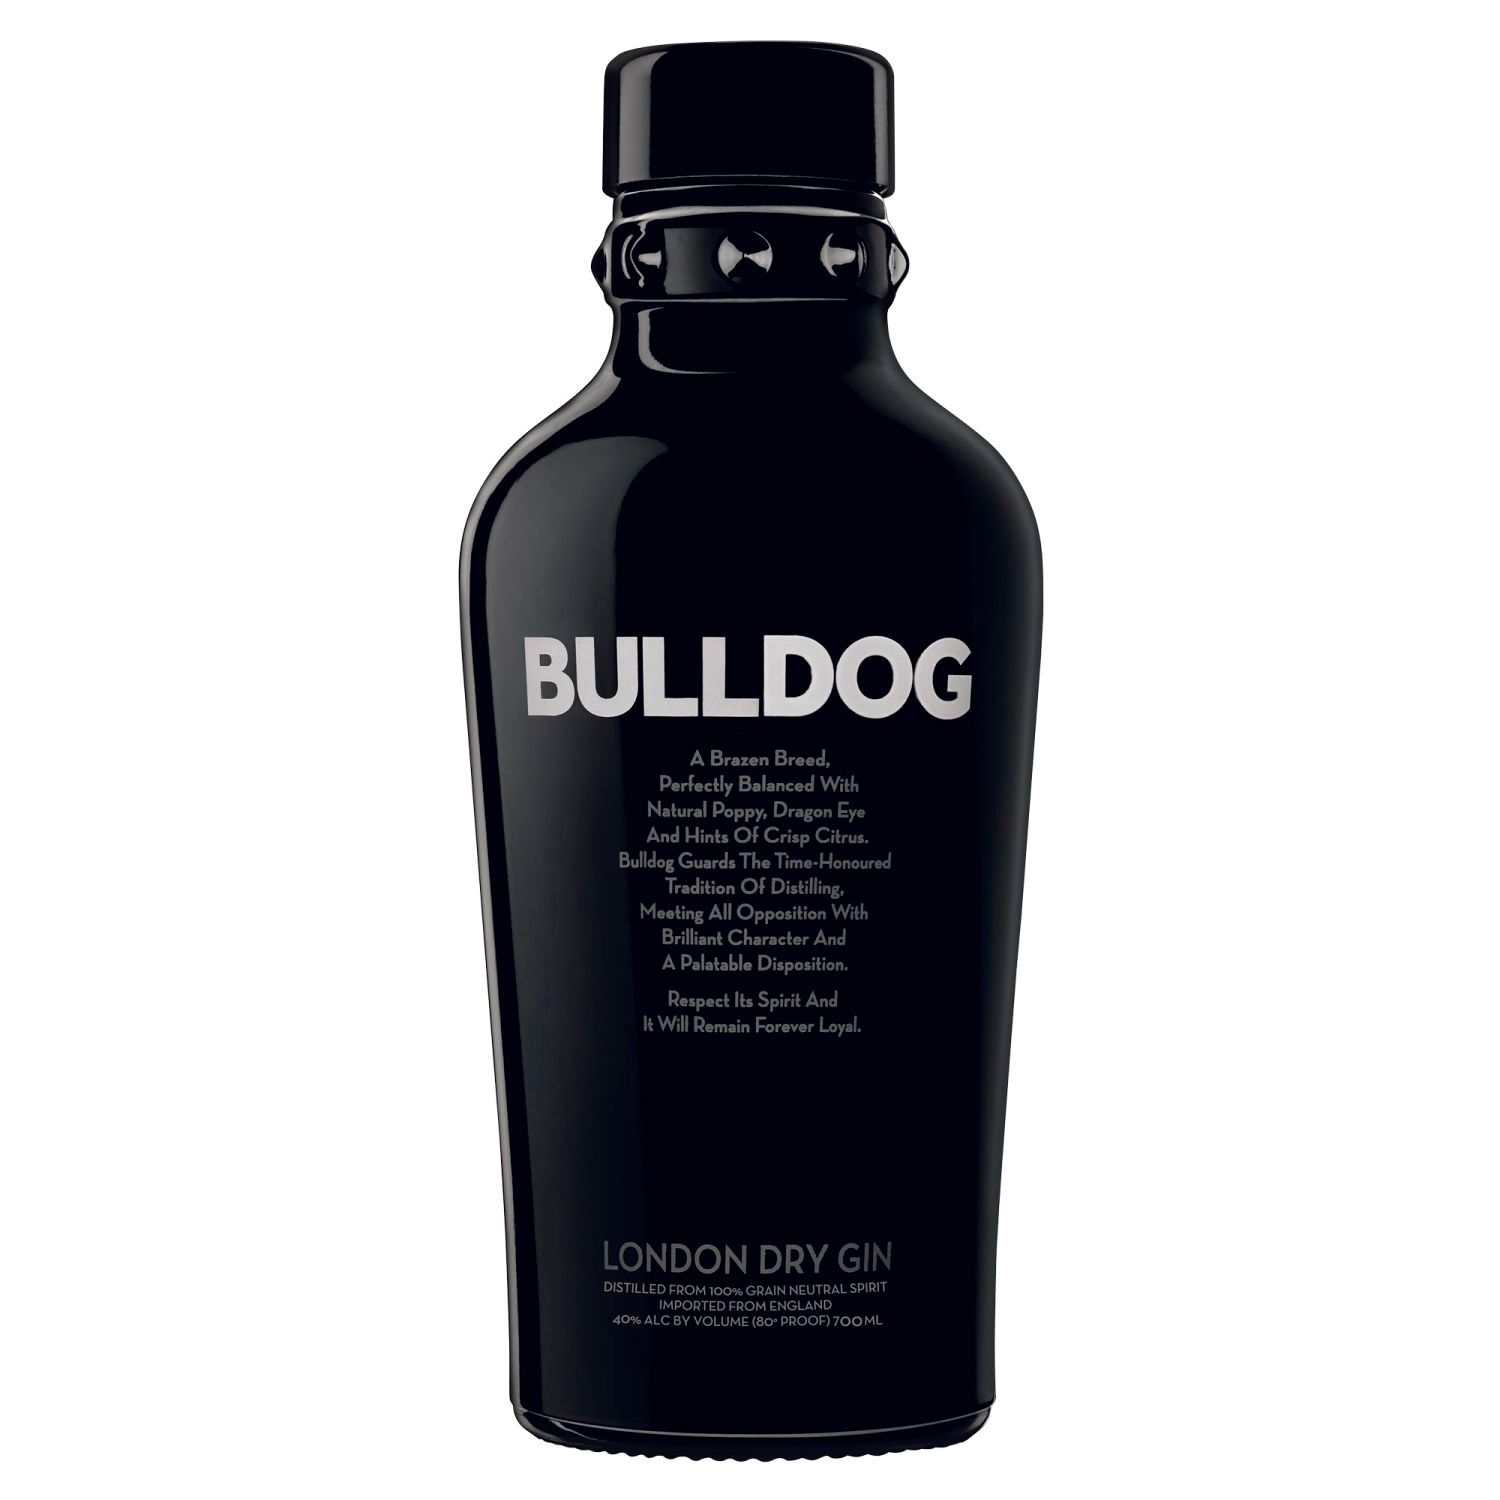 Bulldog Gin is defiantly delicious. The balanced flavour and crisp character of Bulldog Gin is infused with 12 of the rarest, most distinctive botanicals; including Dragon Eye (cousin of the Lychee), French lavender, Italian juniper, Asian lotus leaves, Turkish white poppy and Chinese liquorice. Every batch is quadruple distilled in traditional copper pots at one of the world’s finest gin distilleries that has been producing gin since 1761; crafting Bulldog into one of the world’s smoothest, most mixable gins.<br /> <br />Alcohol Volume: 40.00%<br /><br />Pack Format: Bottle<br /><br />Standard Drinks: 22.1</br /><br />Pack Type: Bottle<br /><br />Country of Origin: England<br />